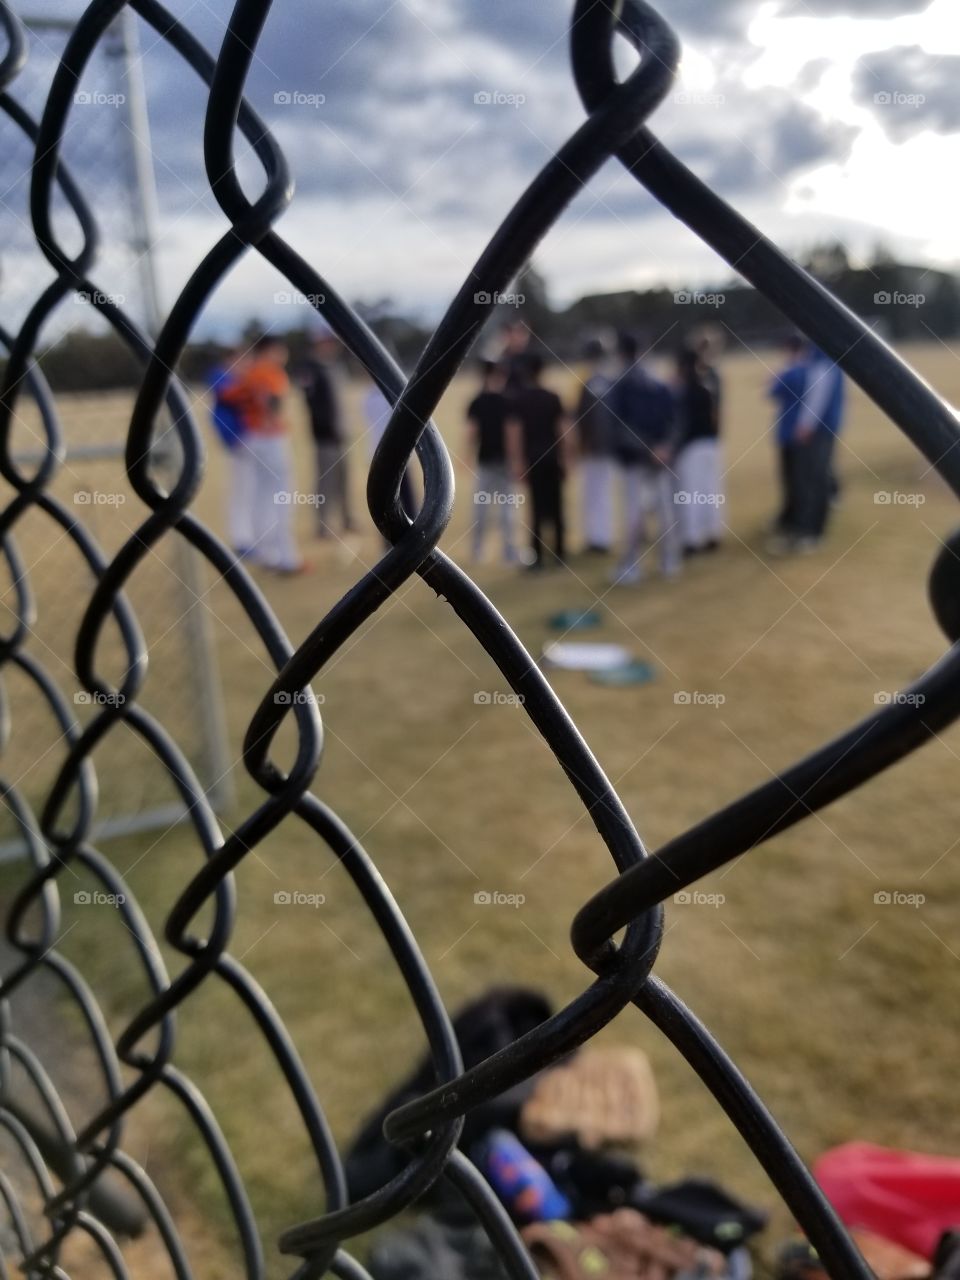 the baseball team, that my eleven year old son is on. he has never played, in any baseball, before. they put him directly into fast pitch, base all, for his first year of little league!